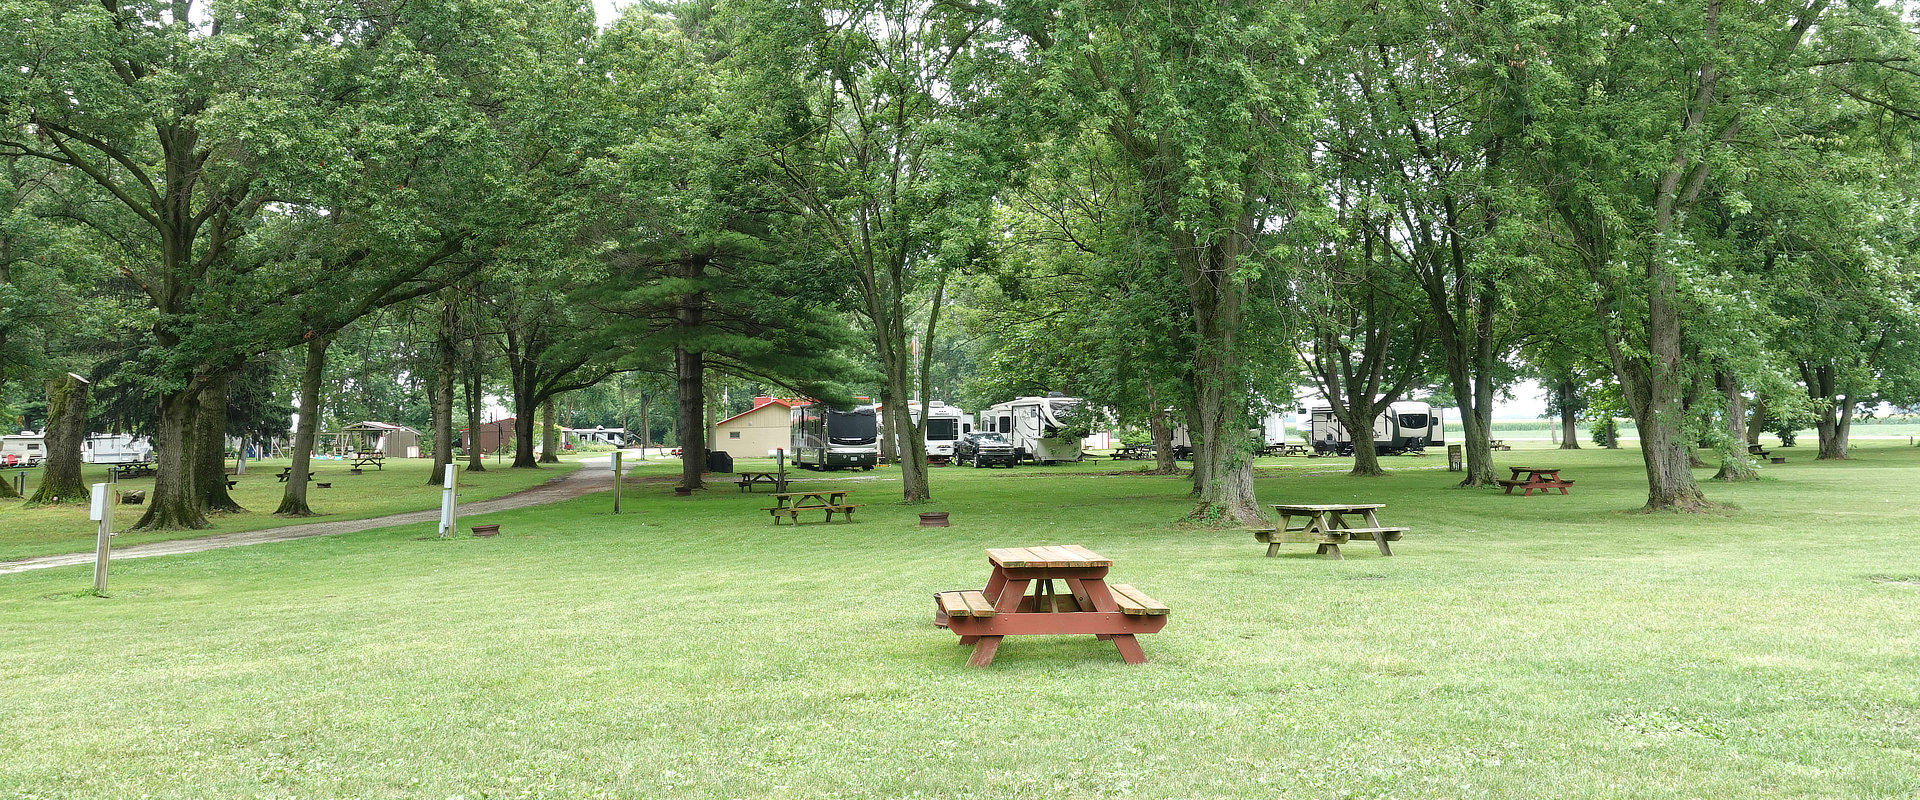 Field with picnic tables and RVs in background